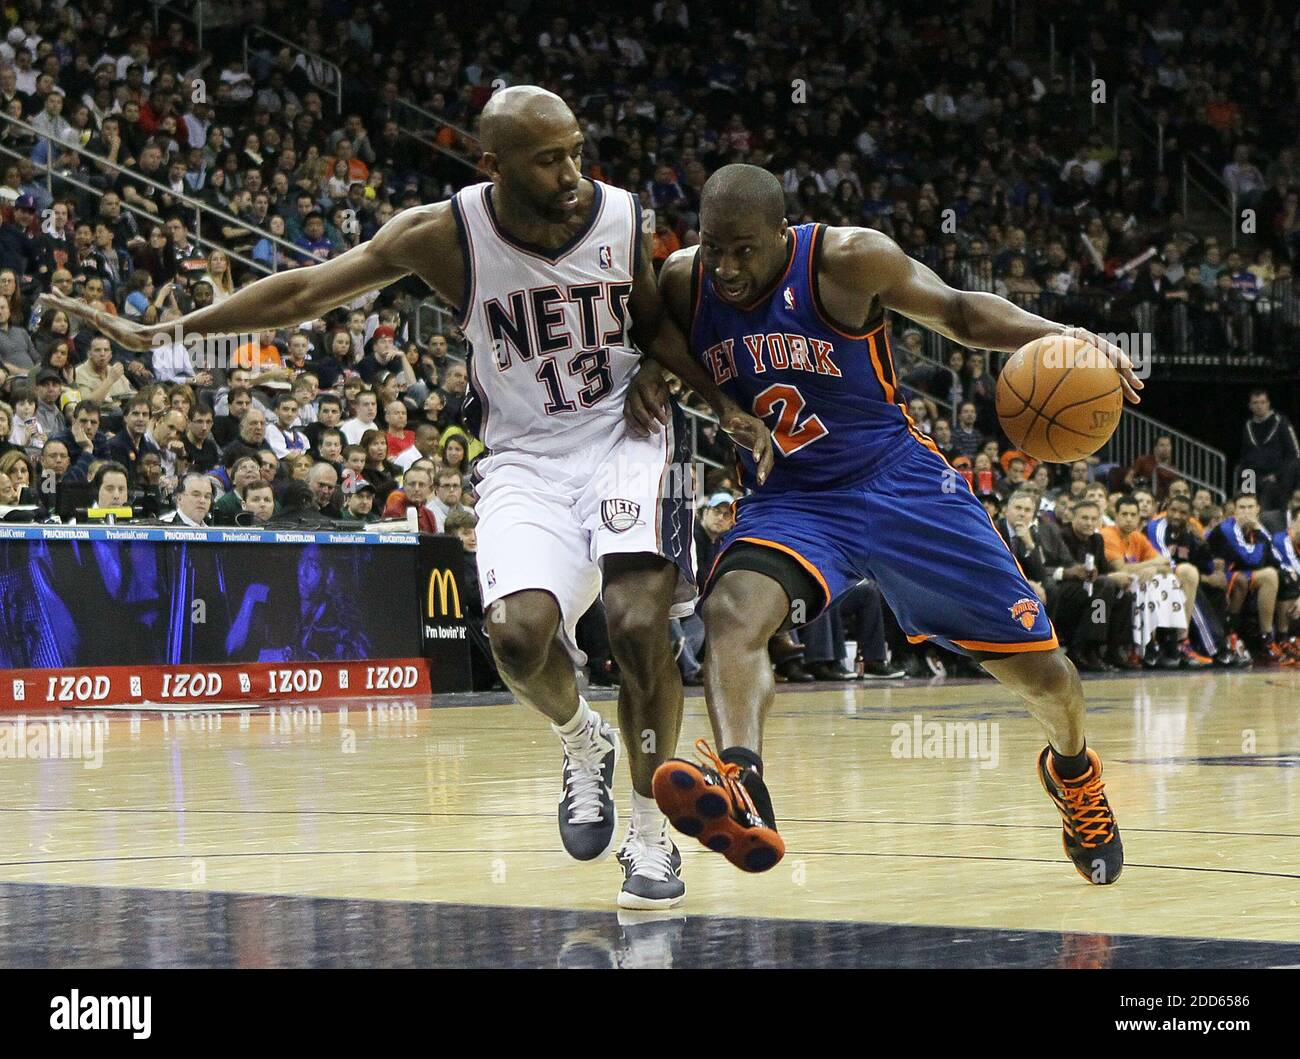 Raymond Felton, right, of the New York Knicks drives against Quinton Ross  of the New Jersey Nets at the Prudential Center in Newark, New Jersey, on  Saturday, February 12, 2011. The Knicks